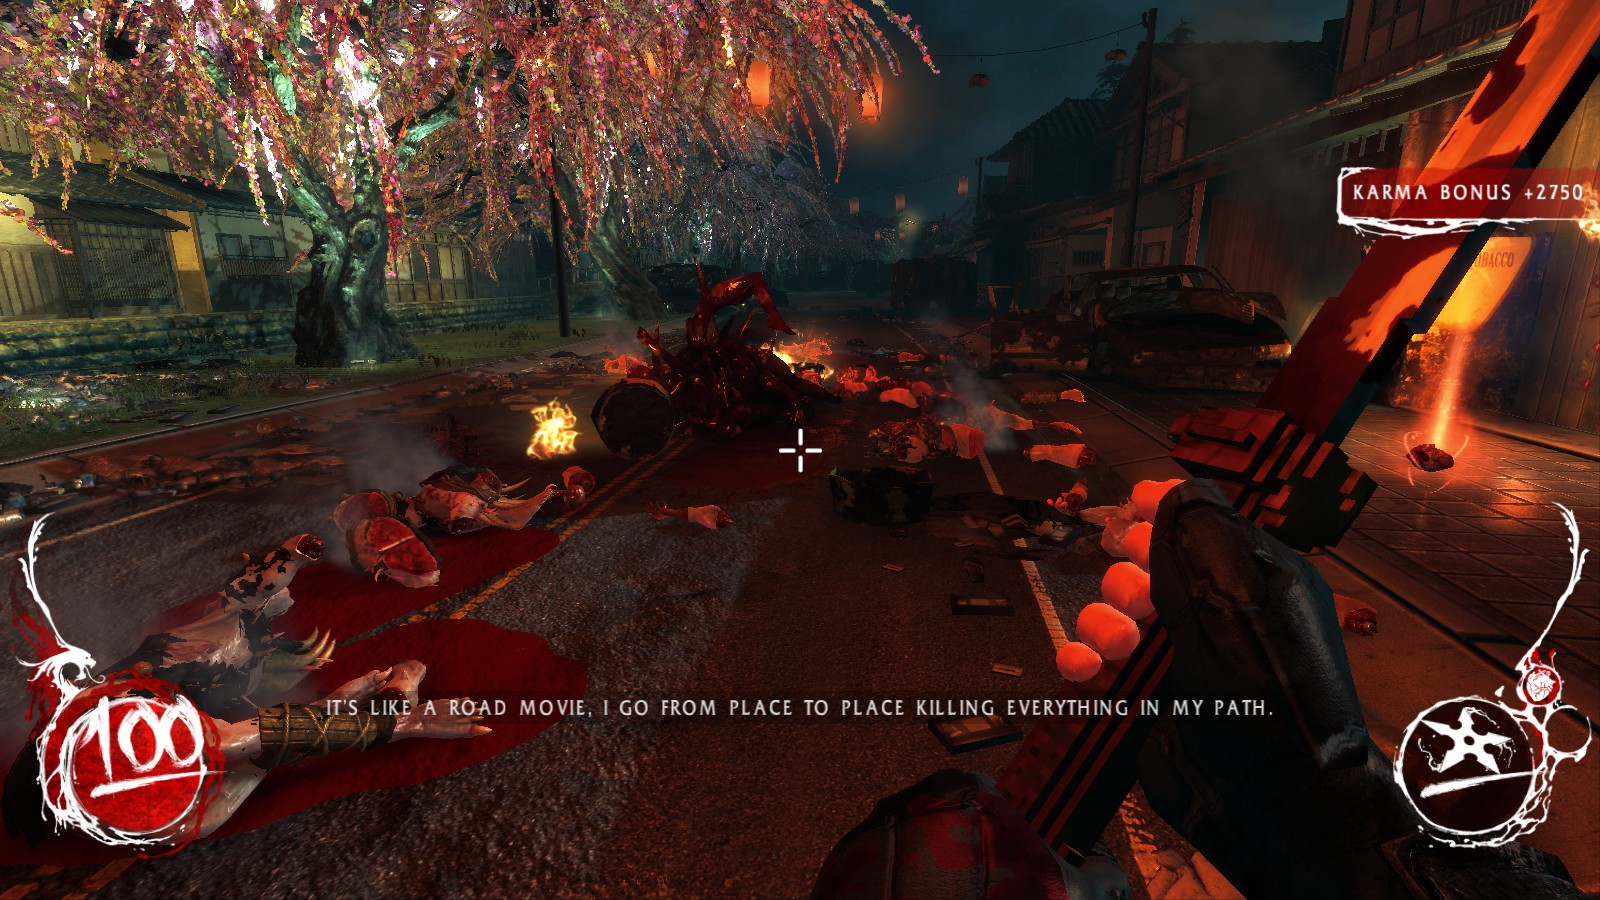 At the end of Chapter 1 in Shadow Warrior (2013), if you ignore